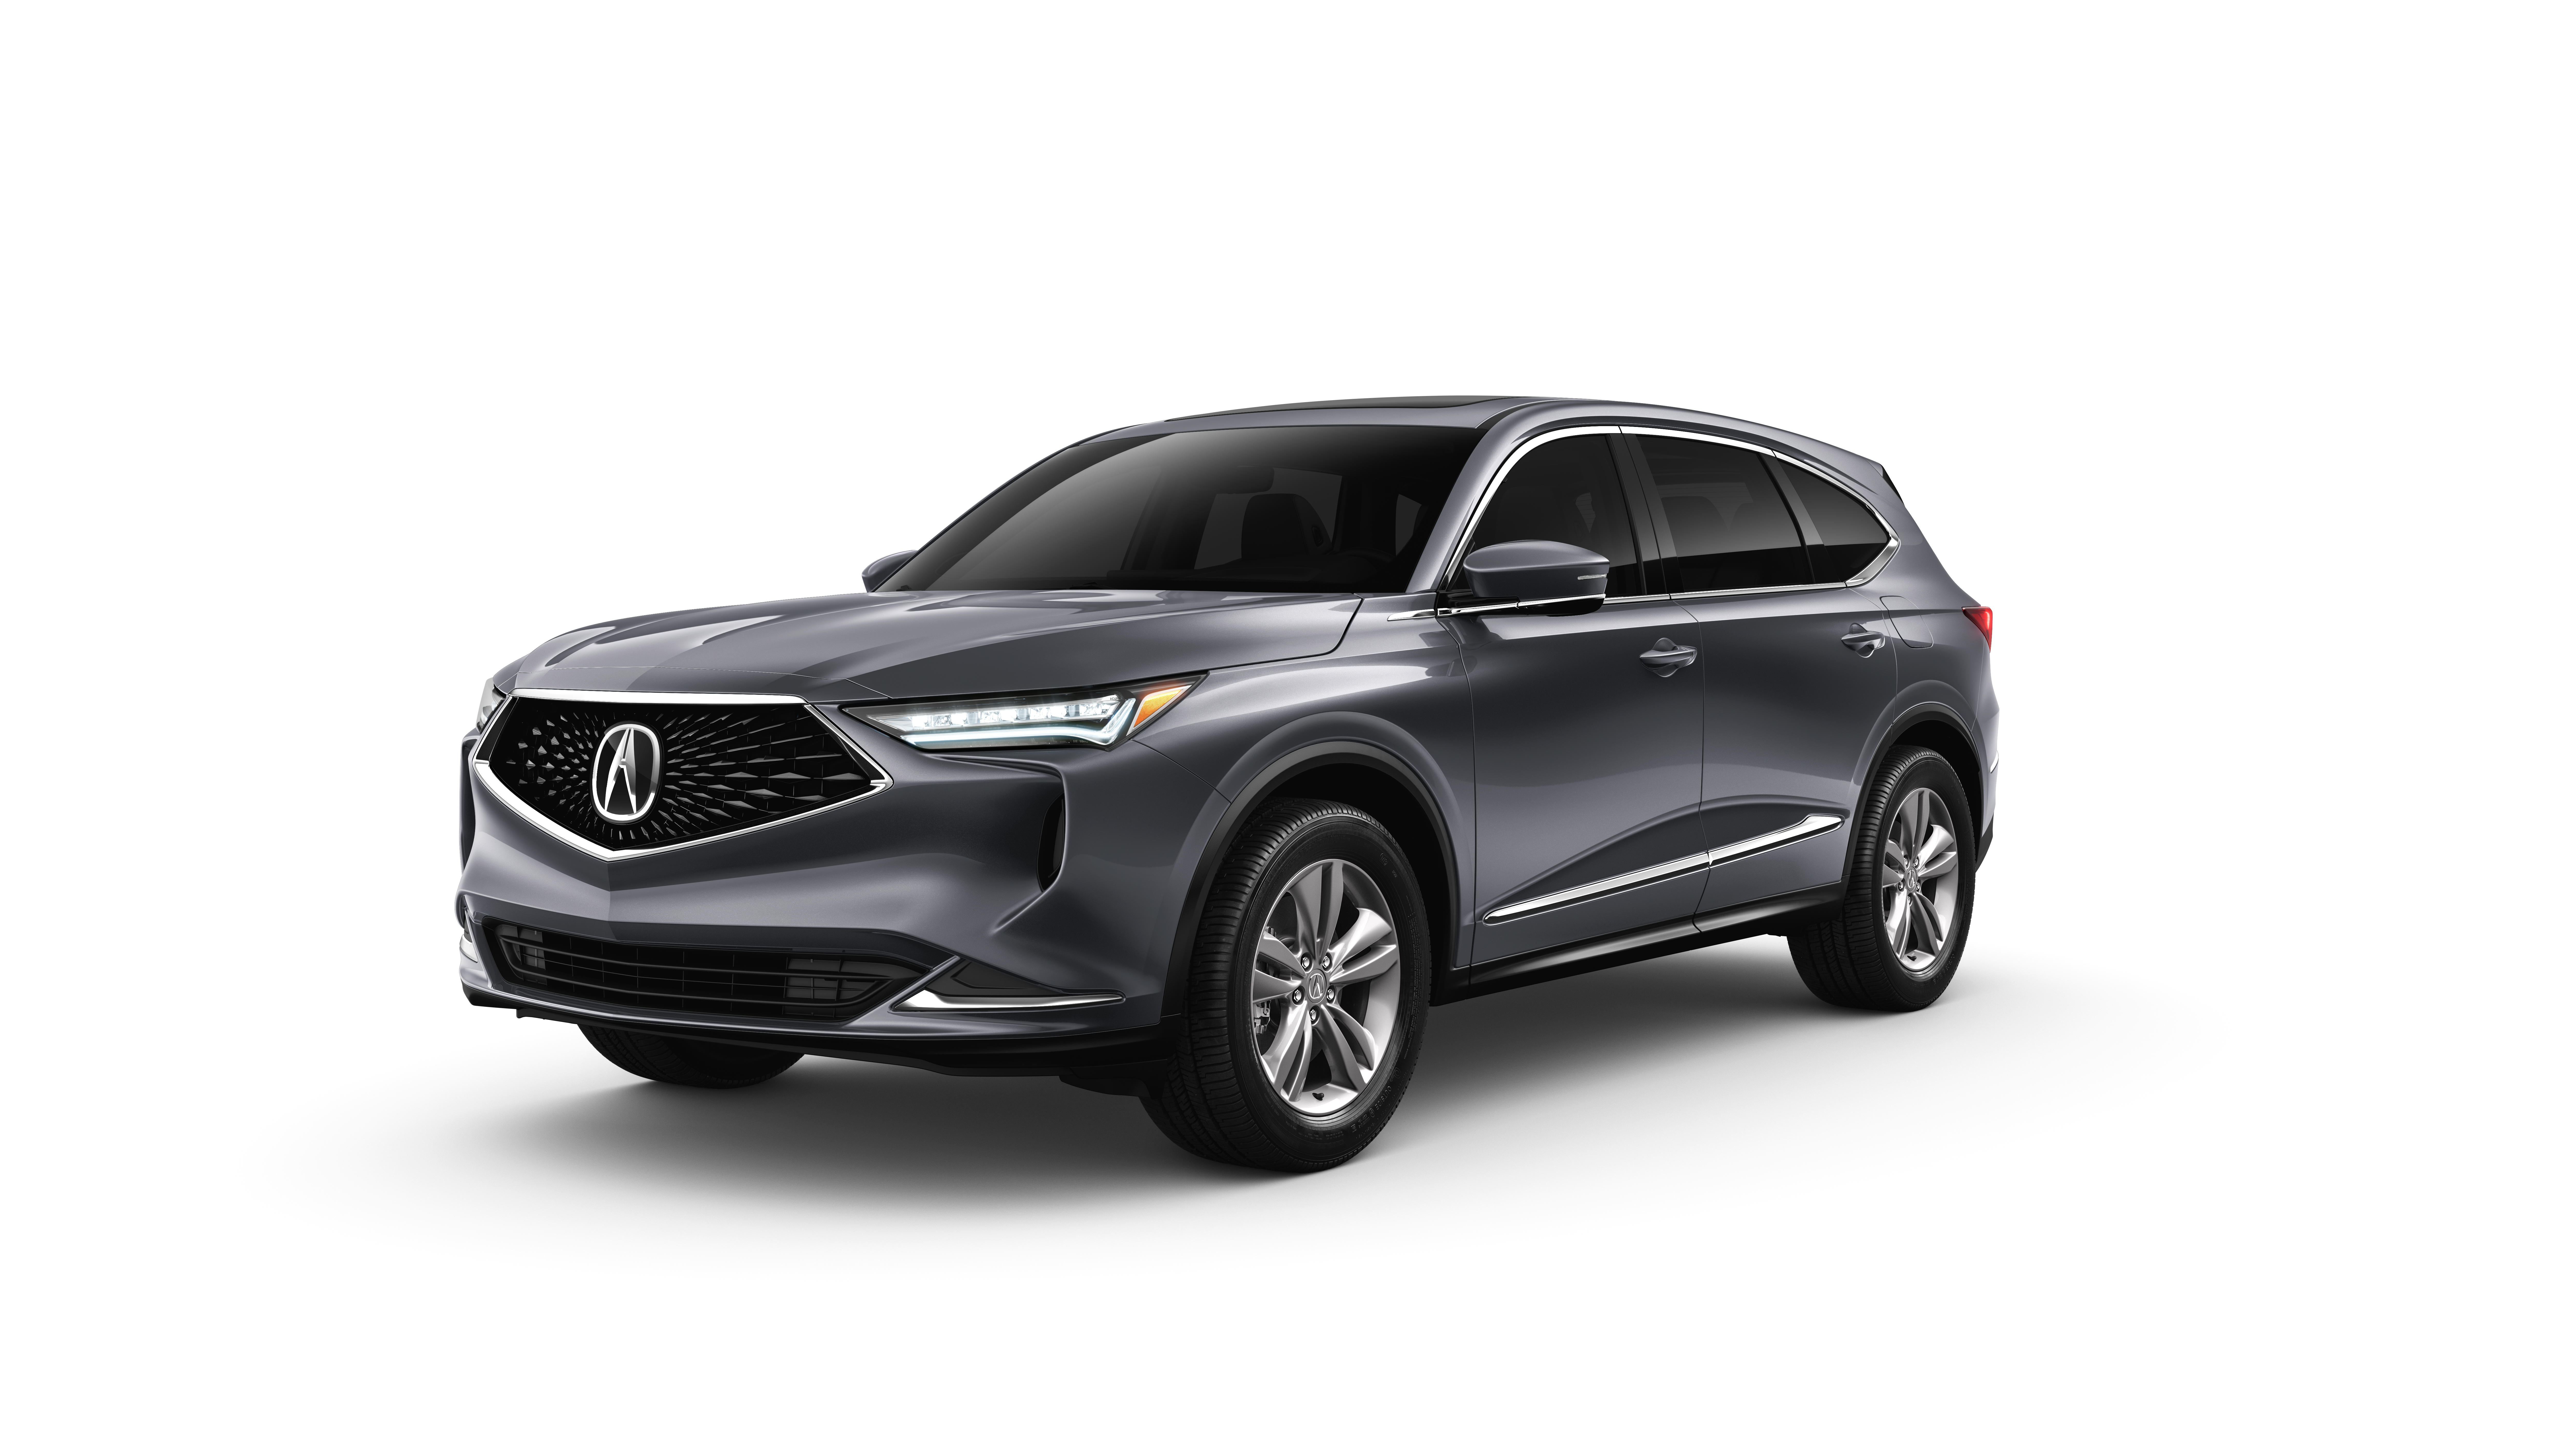 You could win this Acura MDX